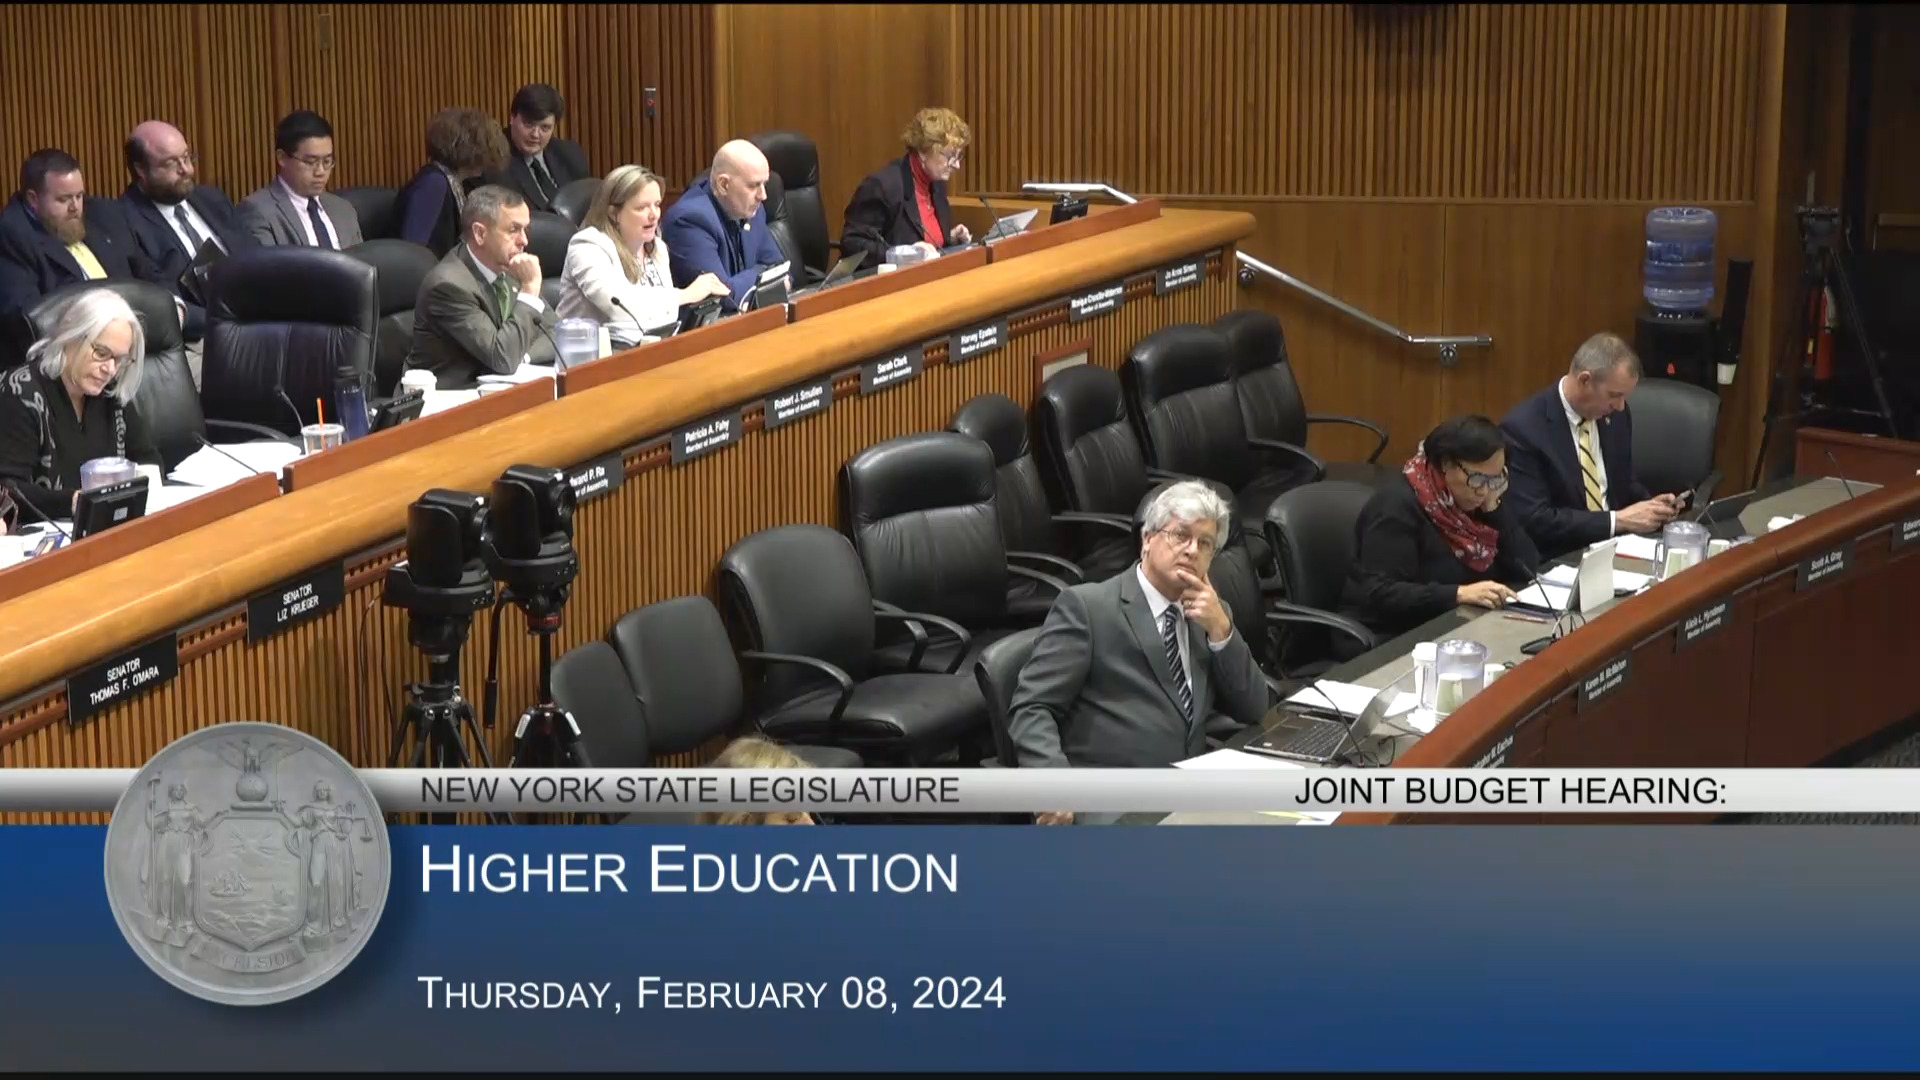 NYS Higher Education Services Corporation President Testifies During Budget Hearing on Higher Education